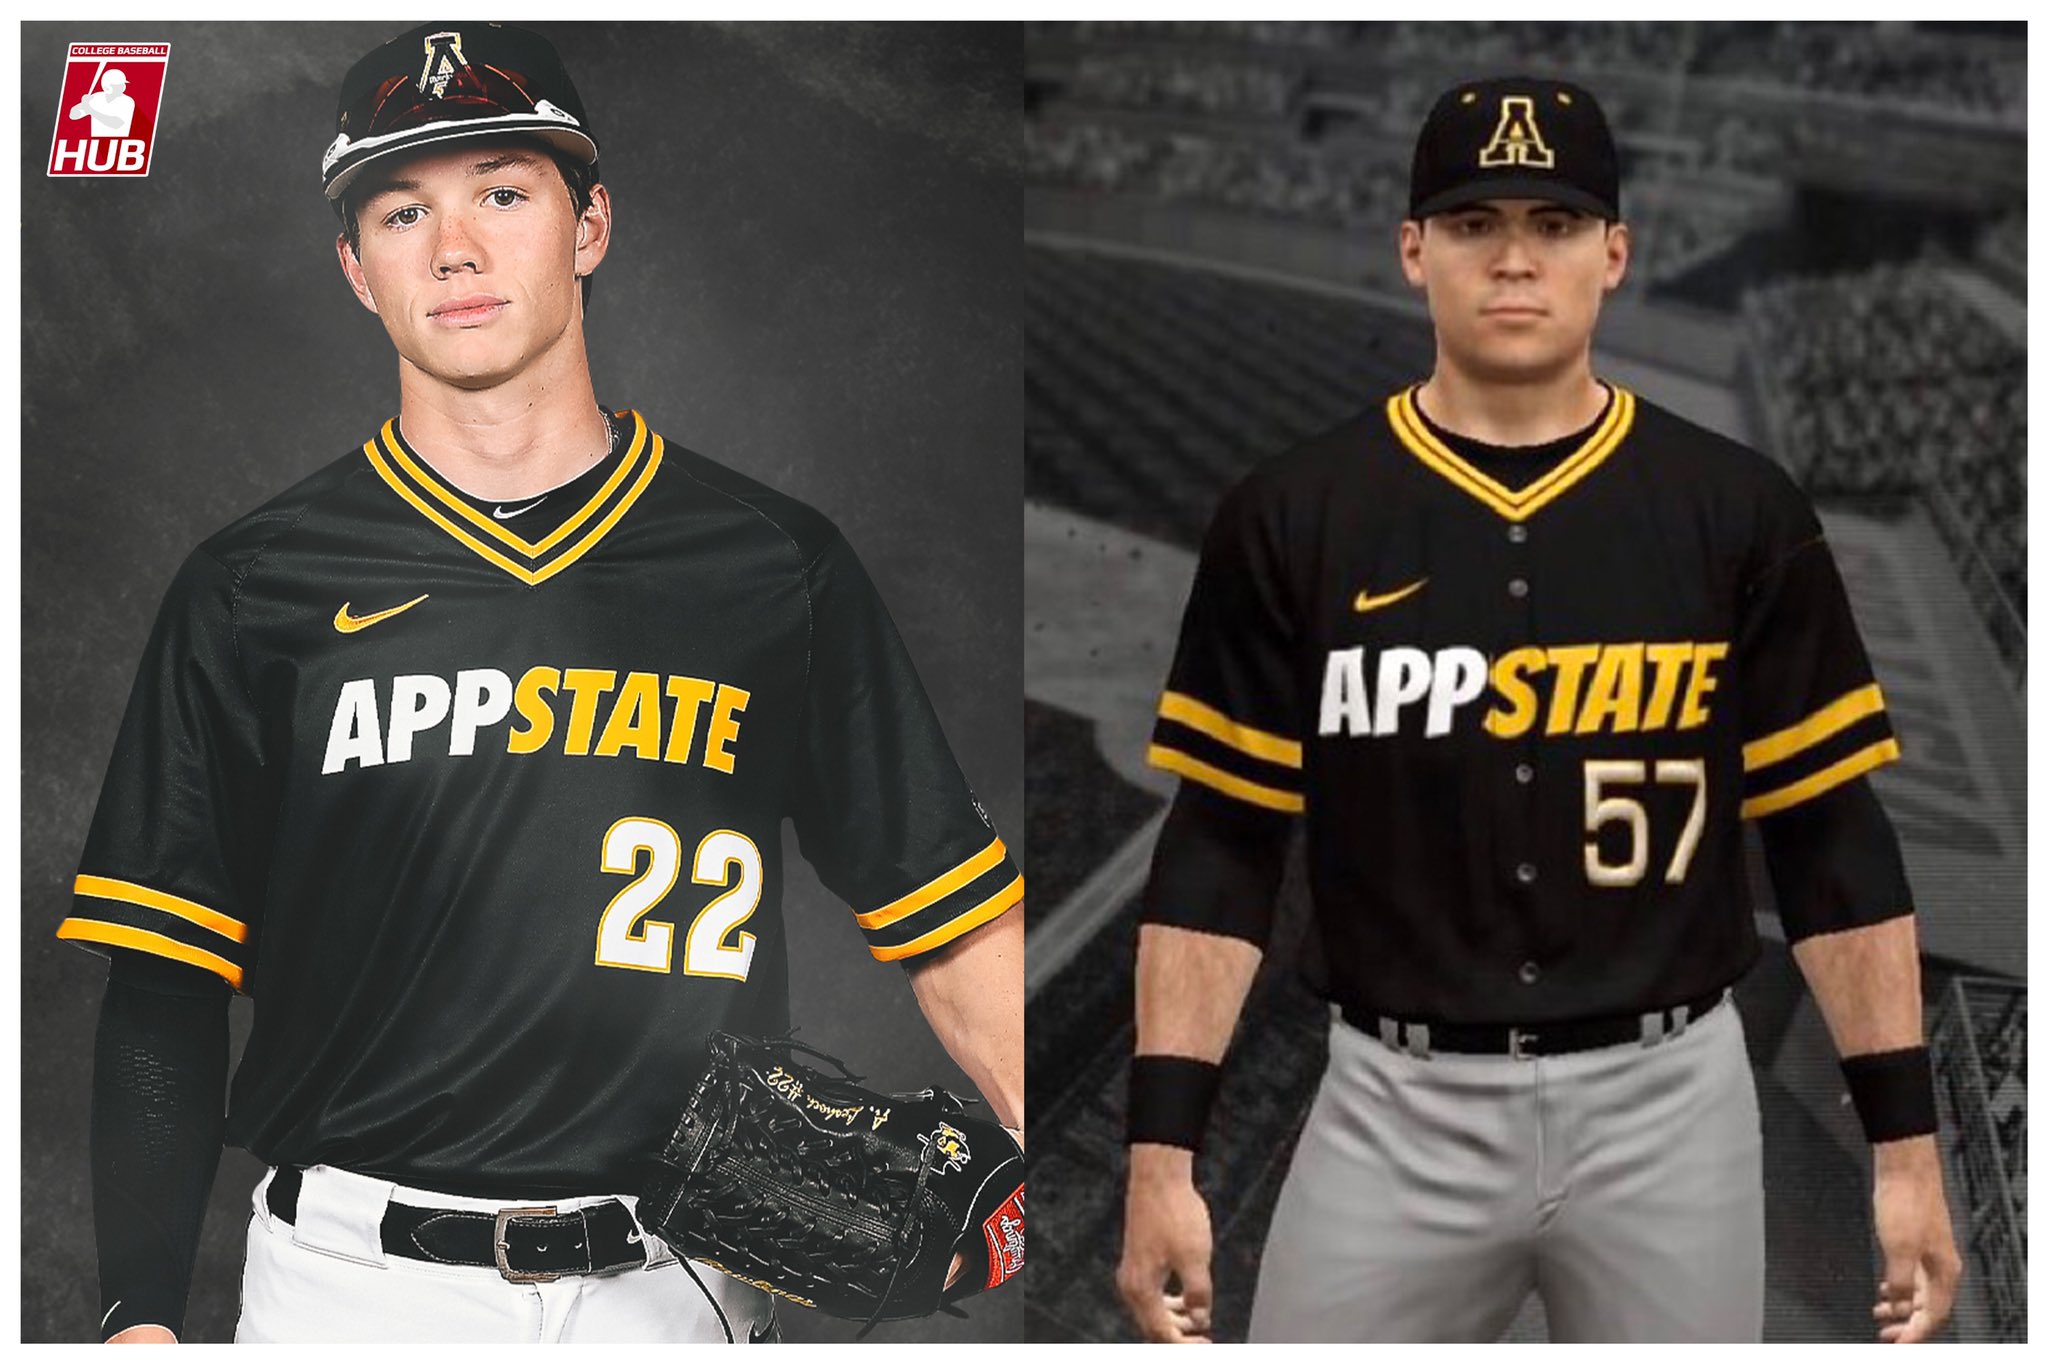 College Baseball Hub on X: Check out some of these custom MLB The Show  uniforms made by the fans/players! Which one is your favorite?   / X